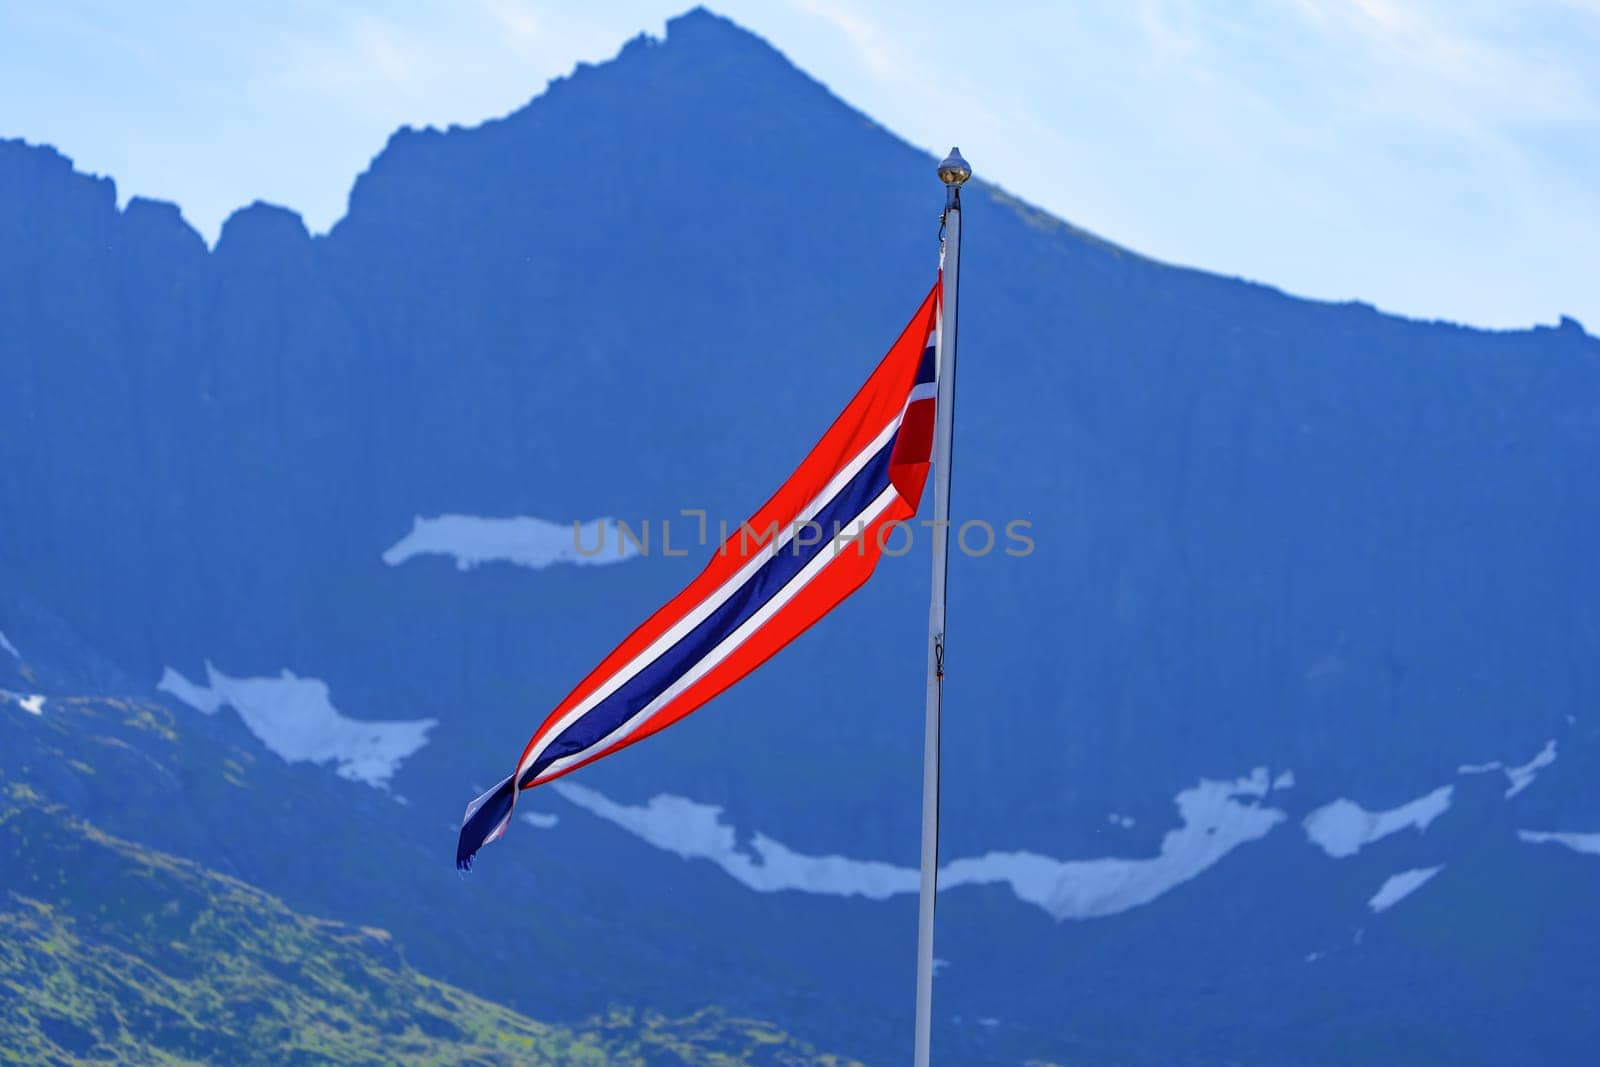 Scenic View of Norwegian Flag Against Majestic Mountain Range by PhotoTime